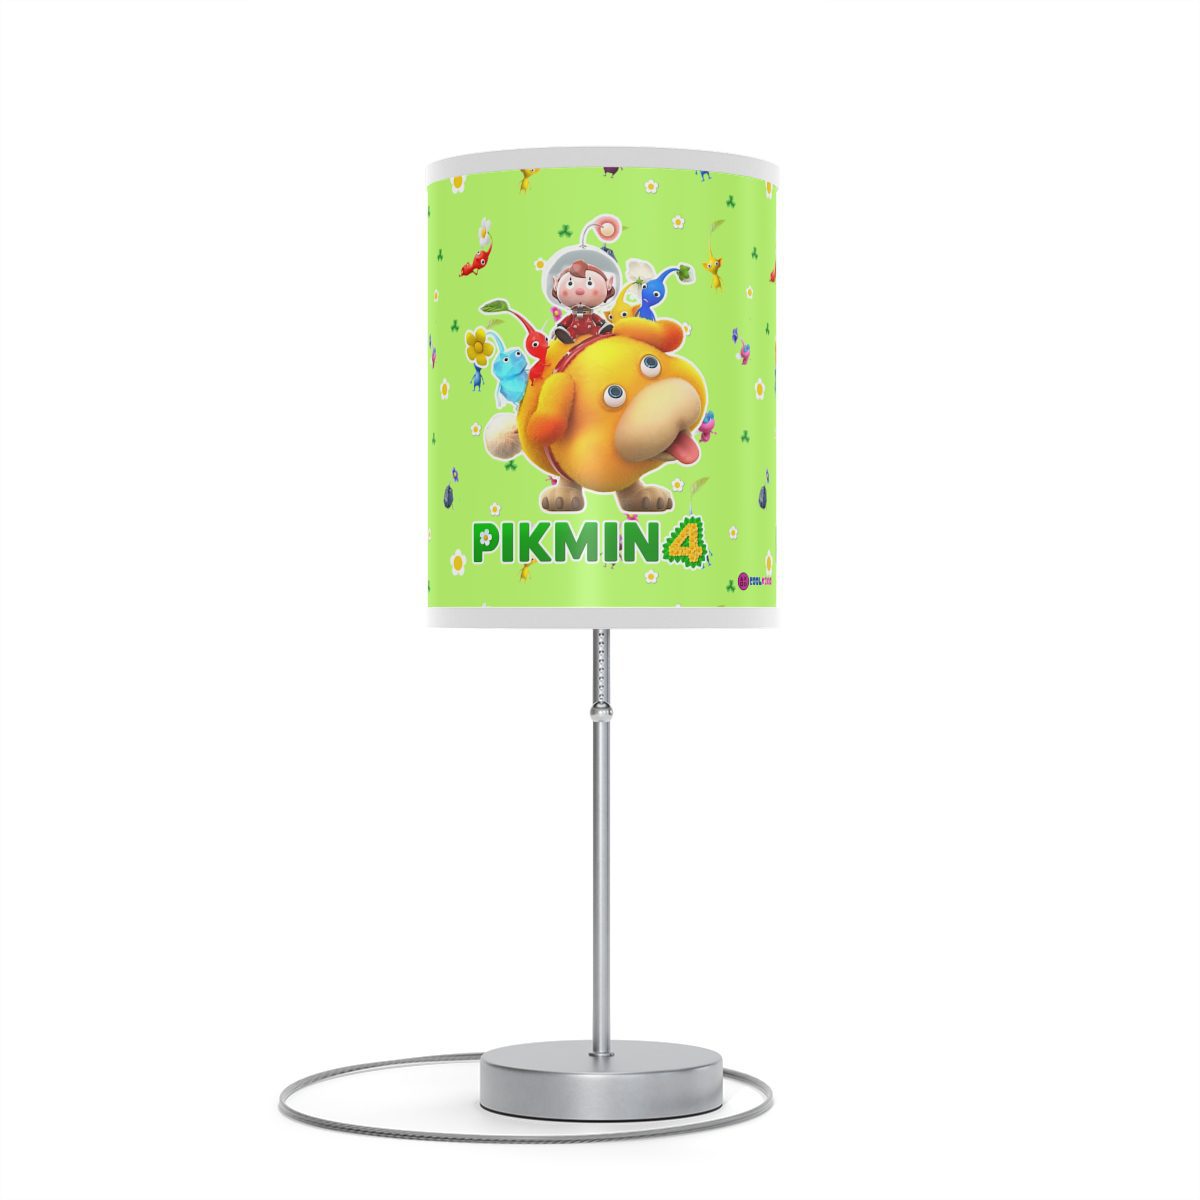 Pikmin 4 videogame Green Lamp on a Stand Cool Kiddo 22